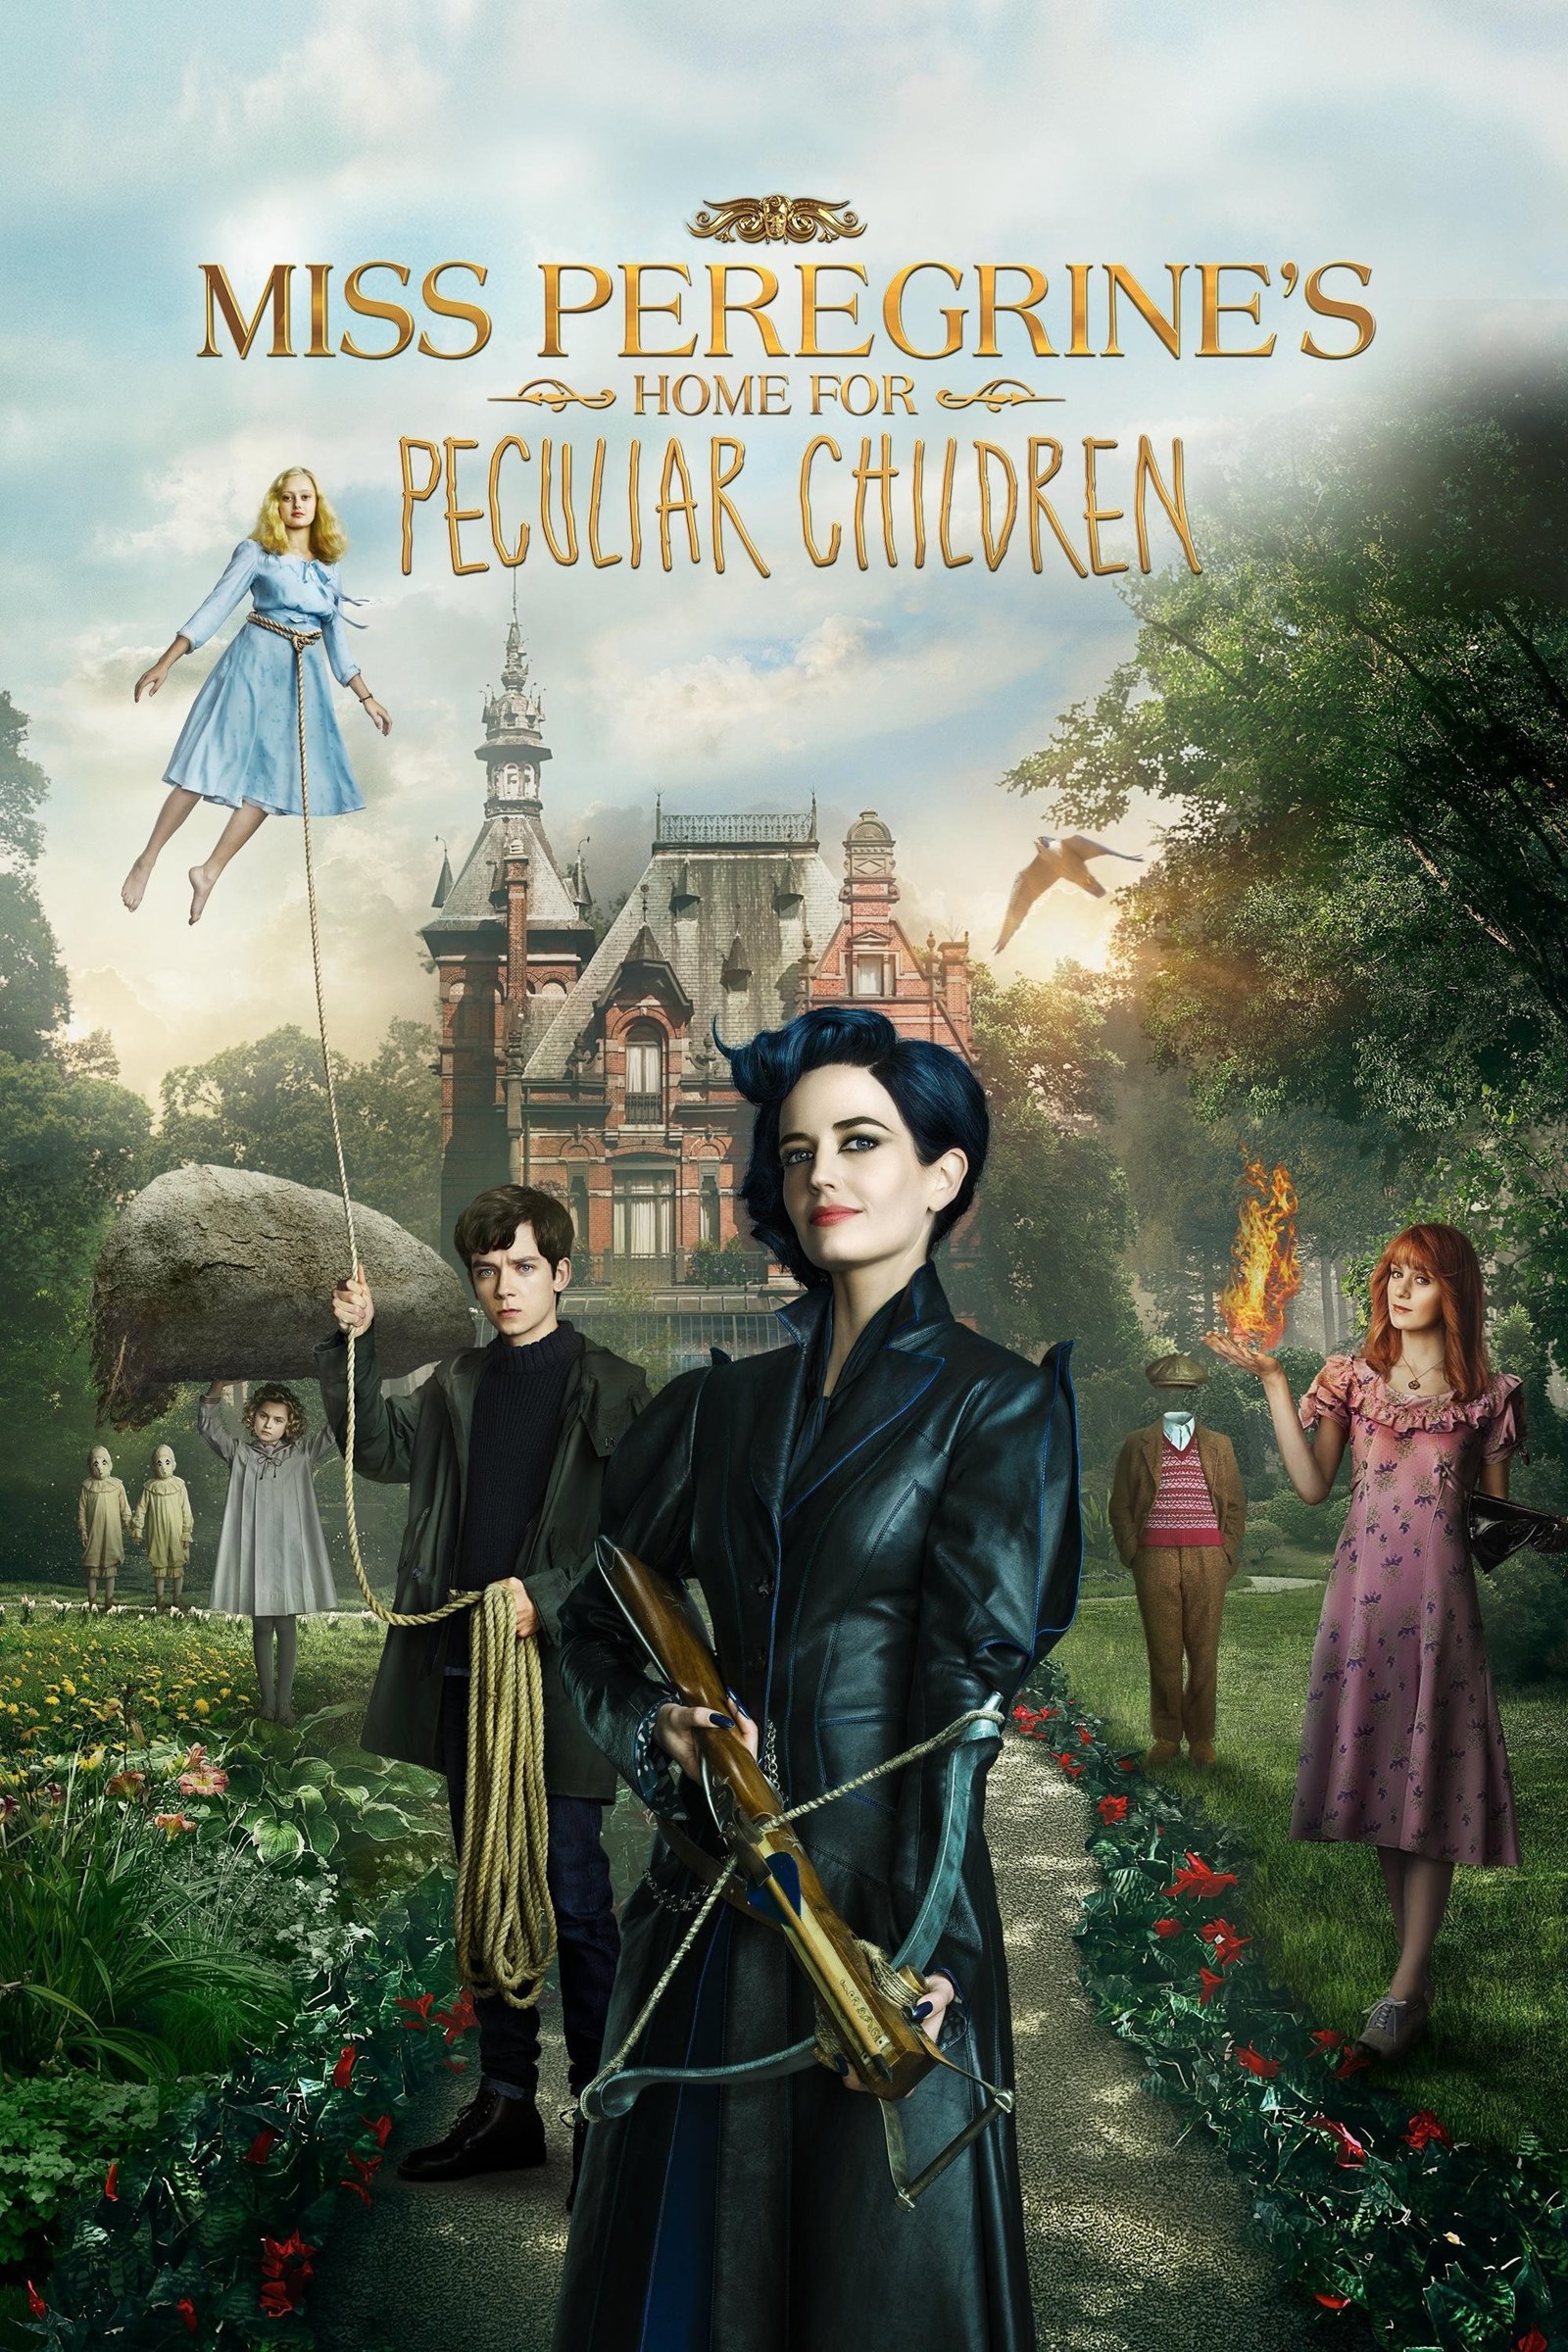 Miss Peregrine's Home For Peculiar Children Backgrounds, Compatible - PC, Mobile, Gadgets| 1600x2400 px